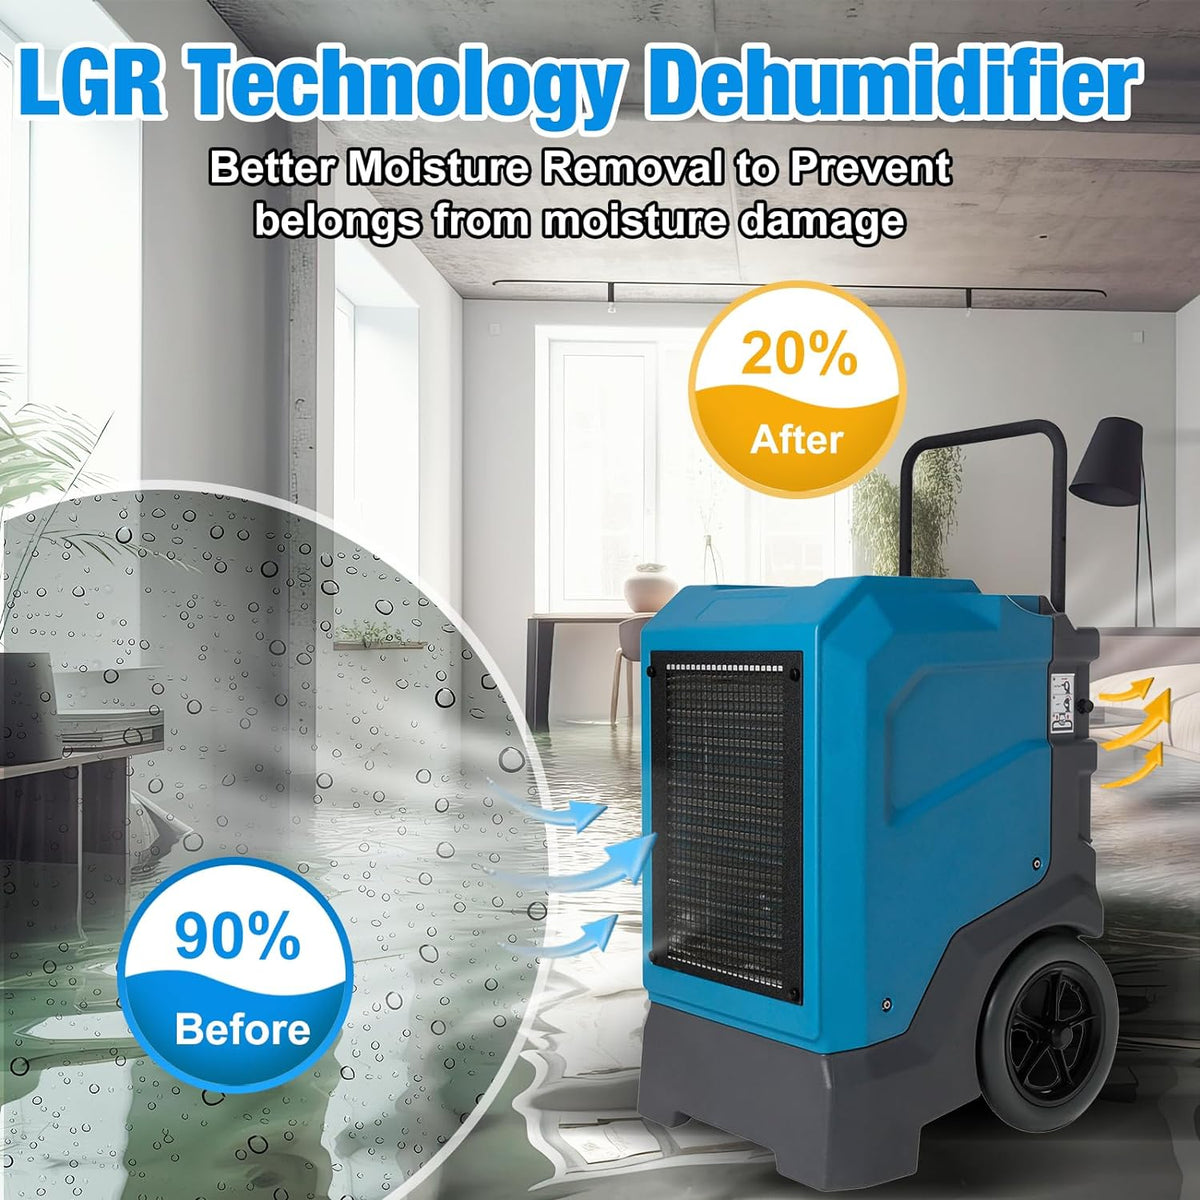 Mounto MOUNTO 310Pints LGR Commercial Dehumidifier with Pump and Drain Hose, Bluetooth, LGR Portable Dehumidifier with wheels for Home, Basements, Garages, and Job Sites.…